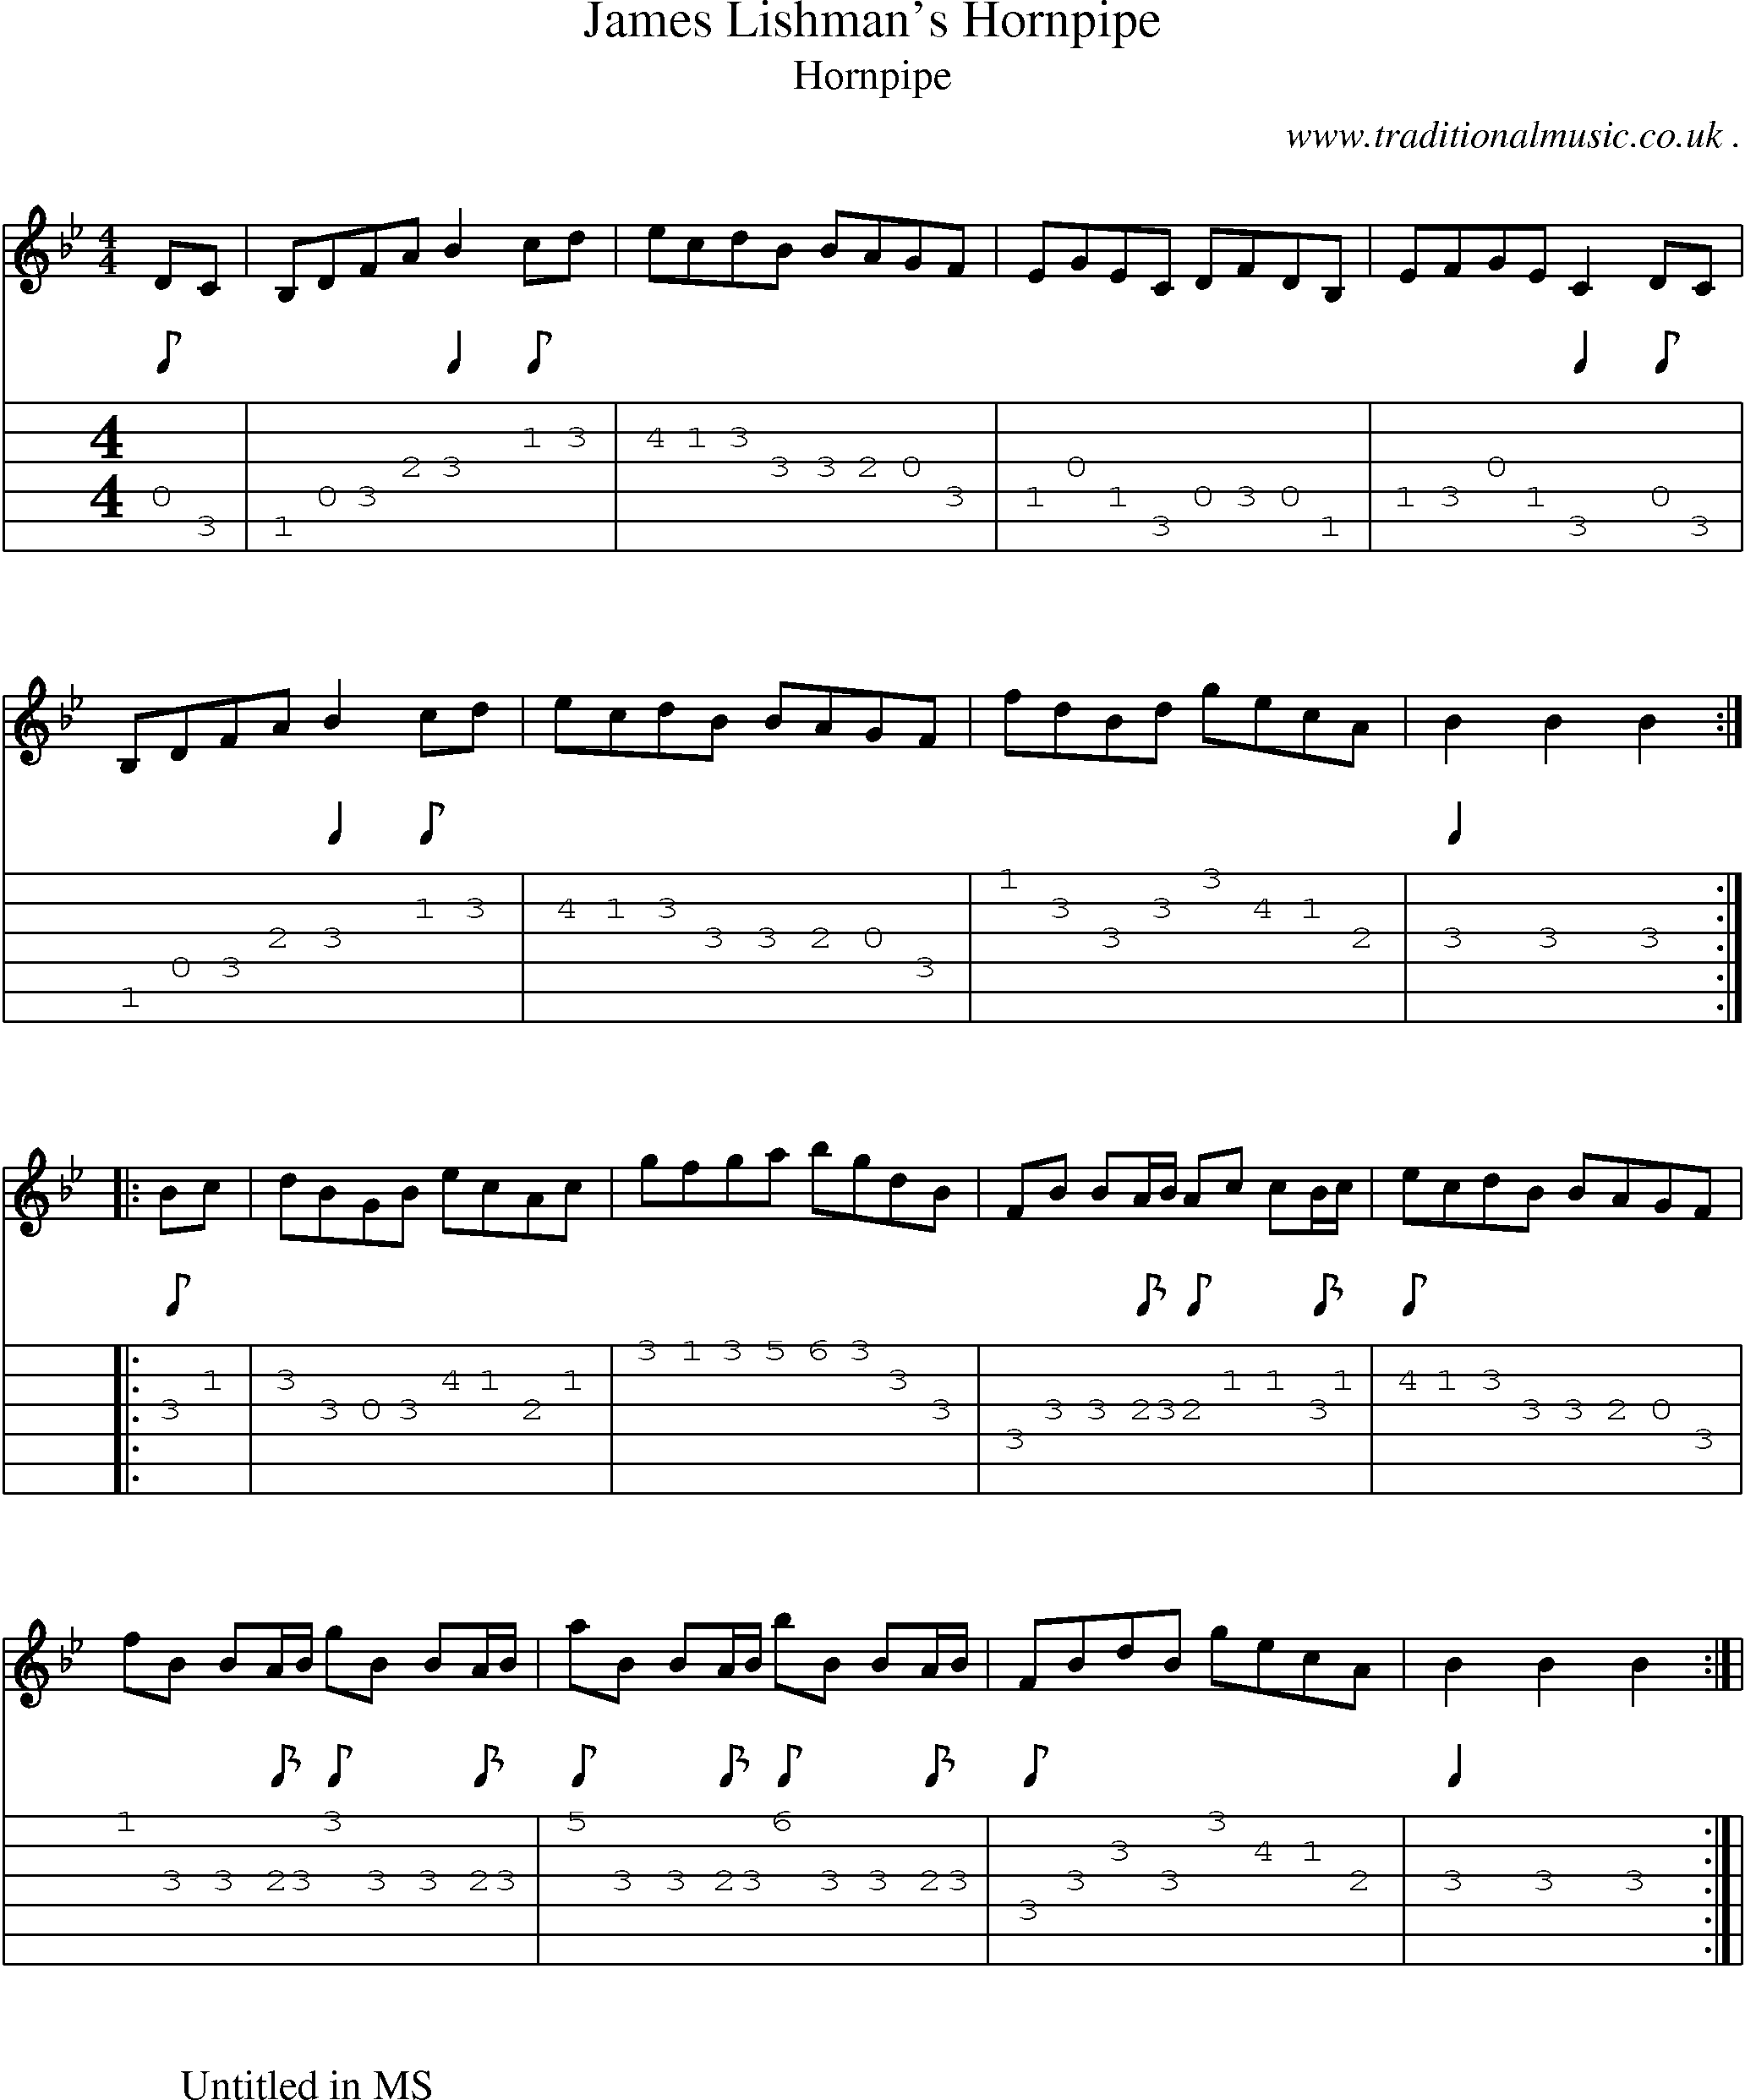 Sheet-Music and Guitar Tabs for James Lishmans Hornpipe